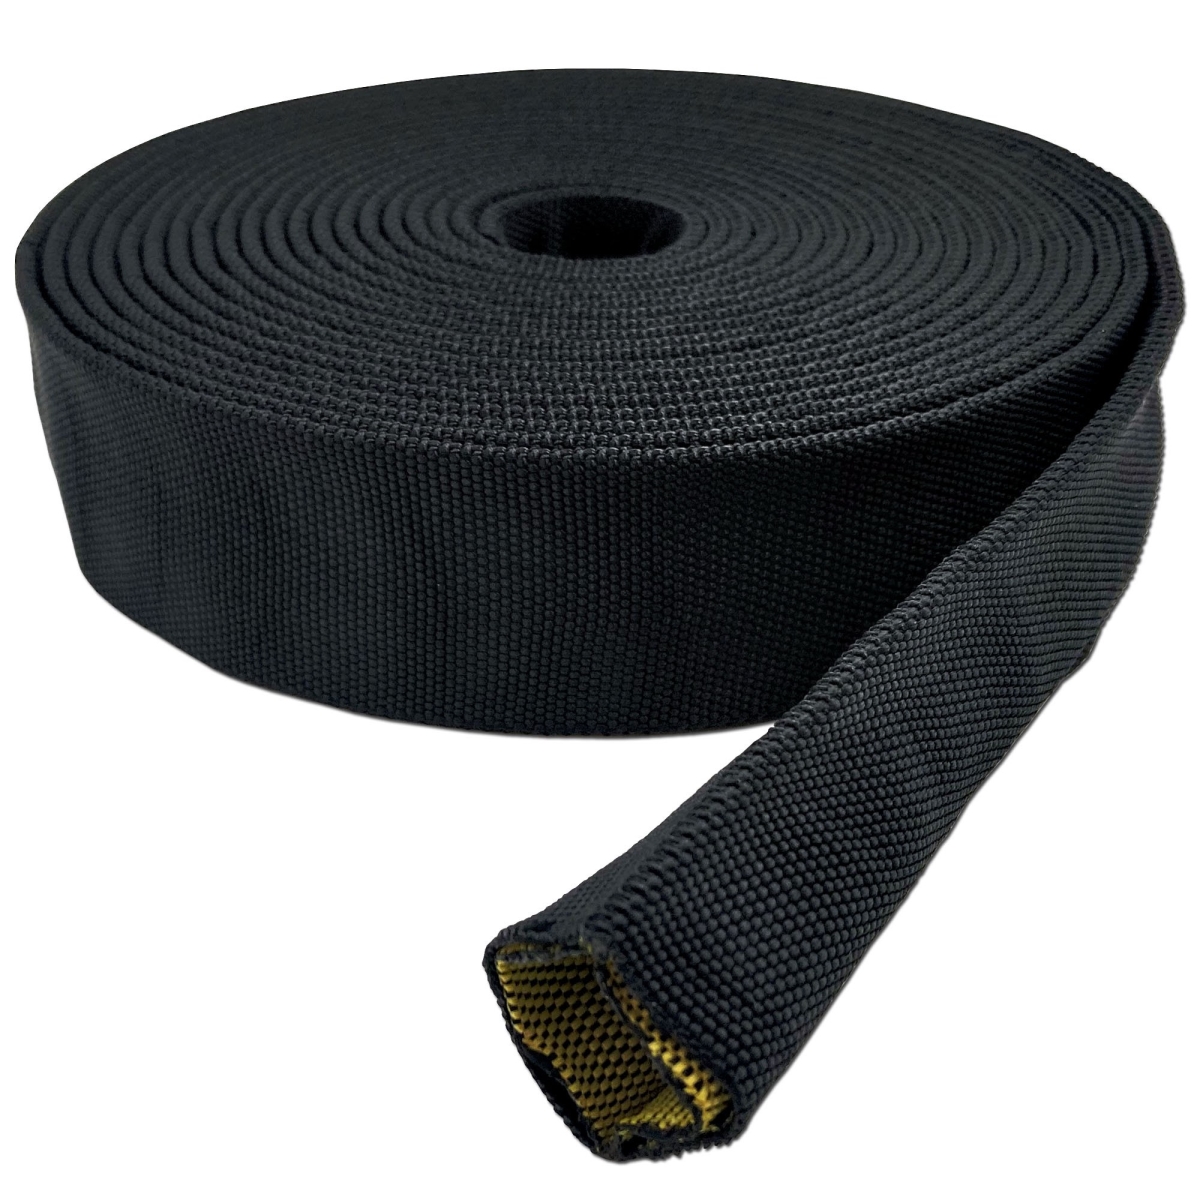 Picture of Electriduct BS-J-BURST-400-50-BK 4 in. x 50 ft. Burst Protection Multifilament Nylon Braided Sleeving - Black